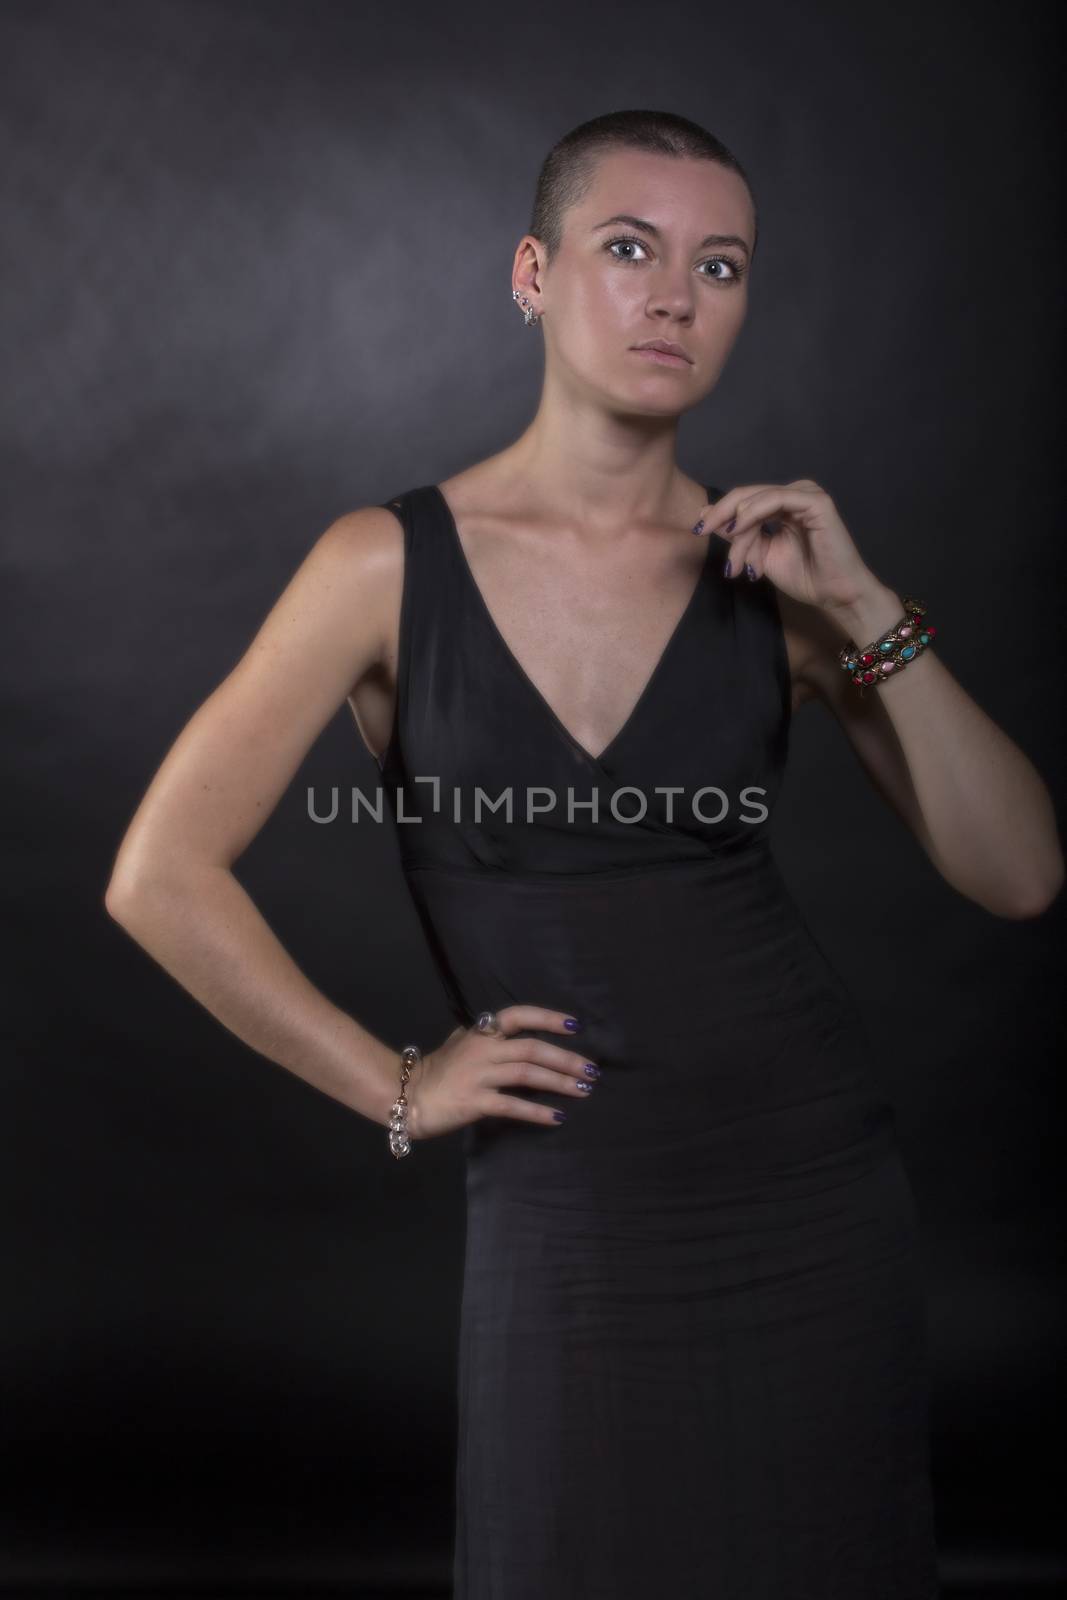 exotic woman with short hair, beauty style portrait